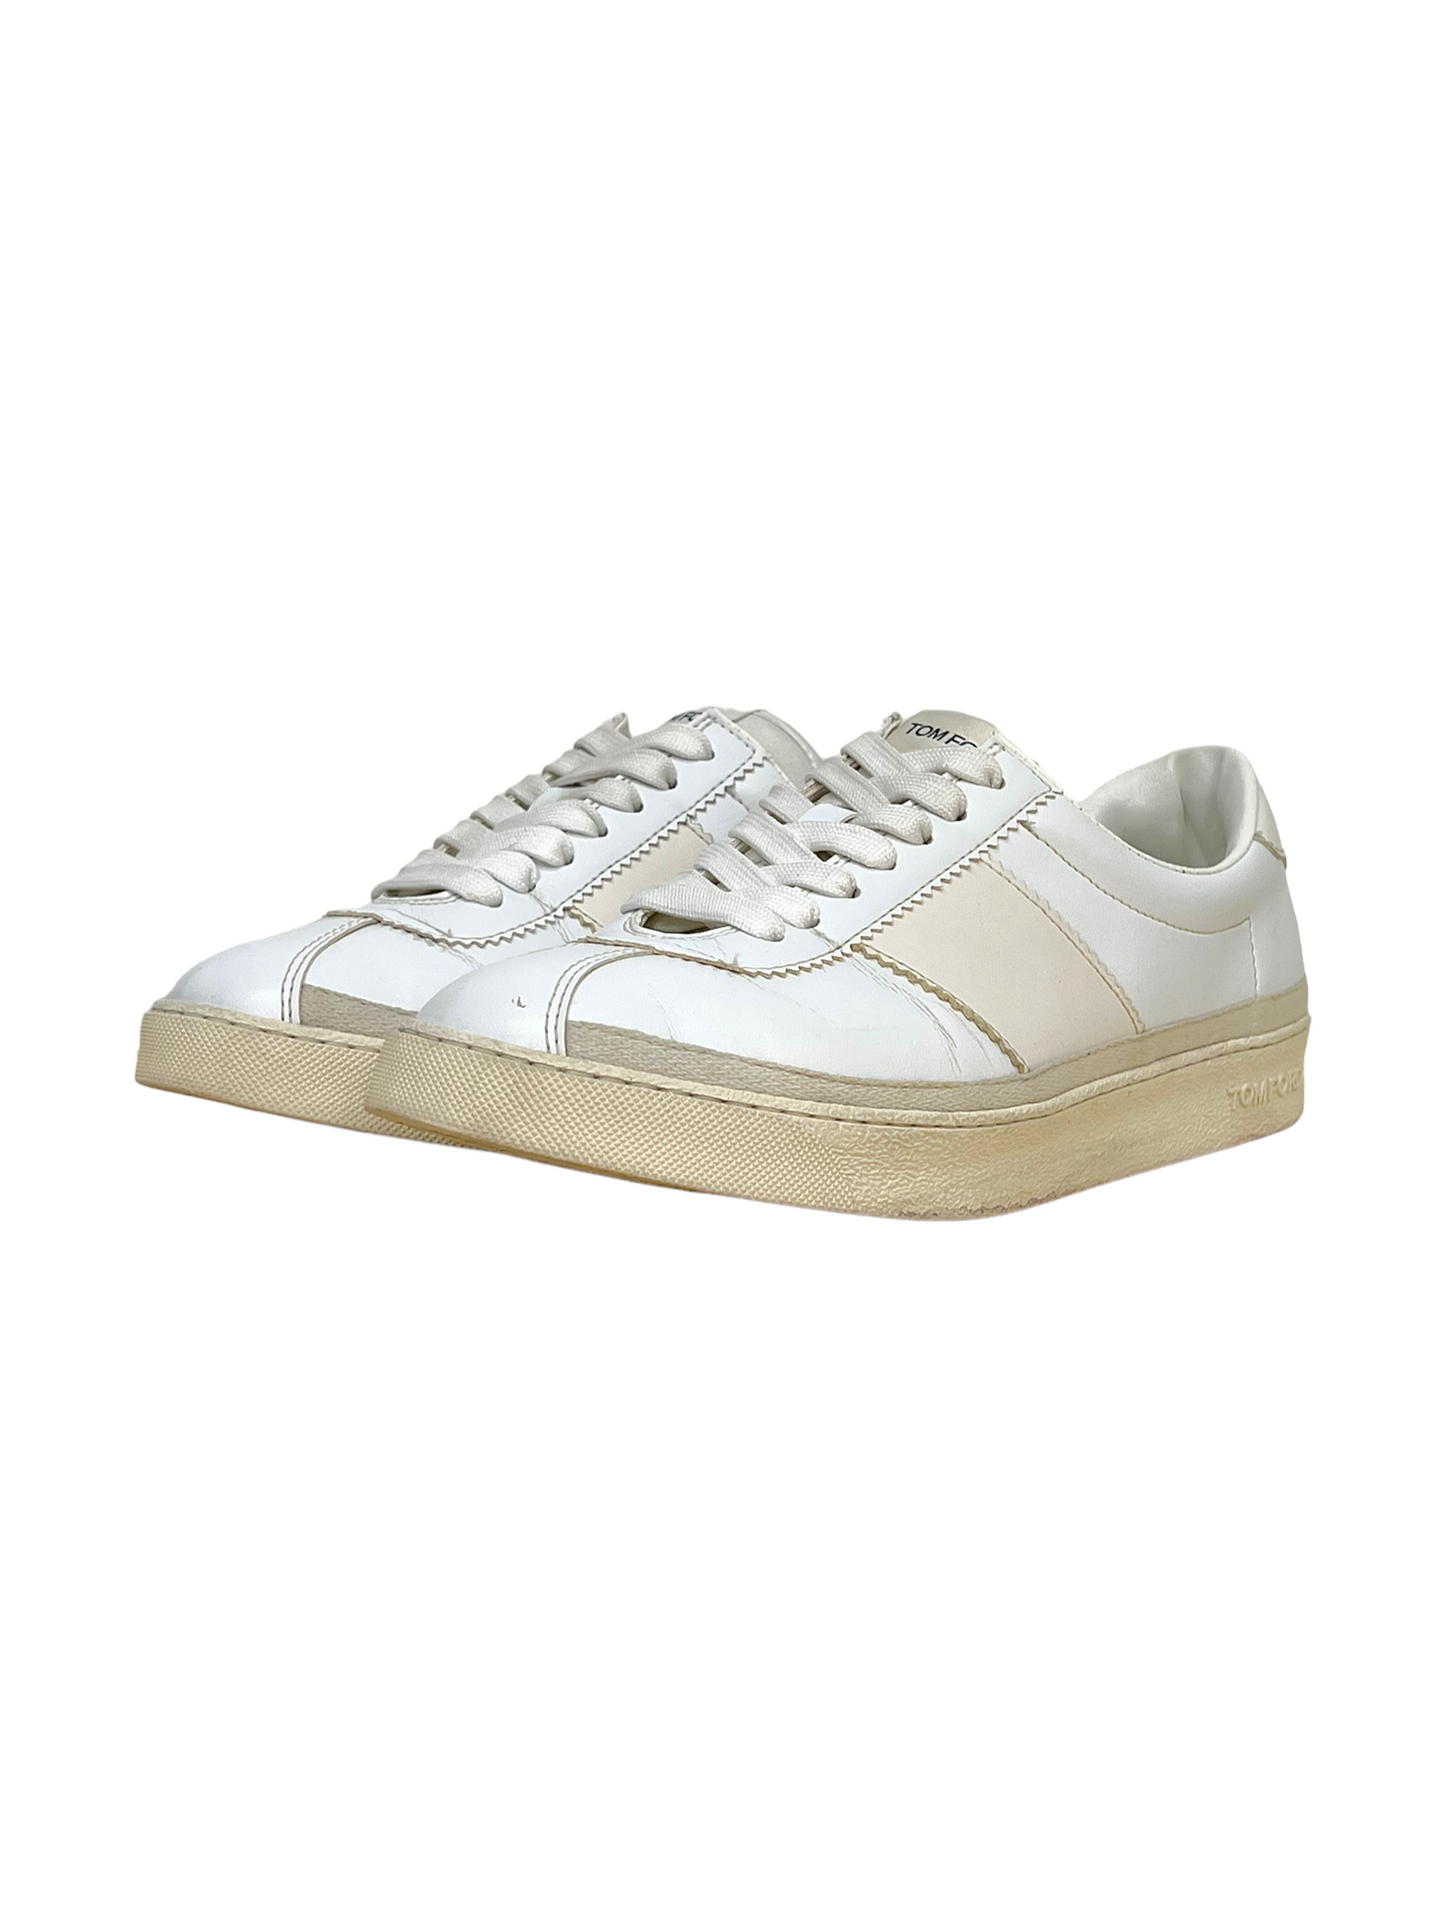 Tom Ford White Bannister Leather Sneakers - Genuine Design Luxury Consignment for Men. New & Pre-Owned Clothing, Shoes, & Accessories. Calgary, Canada